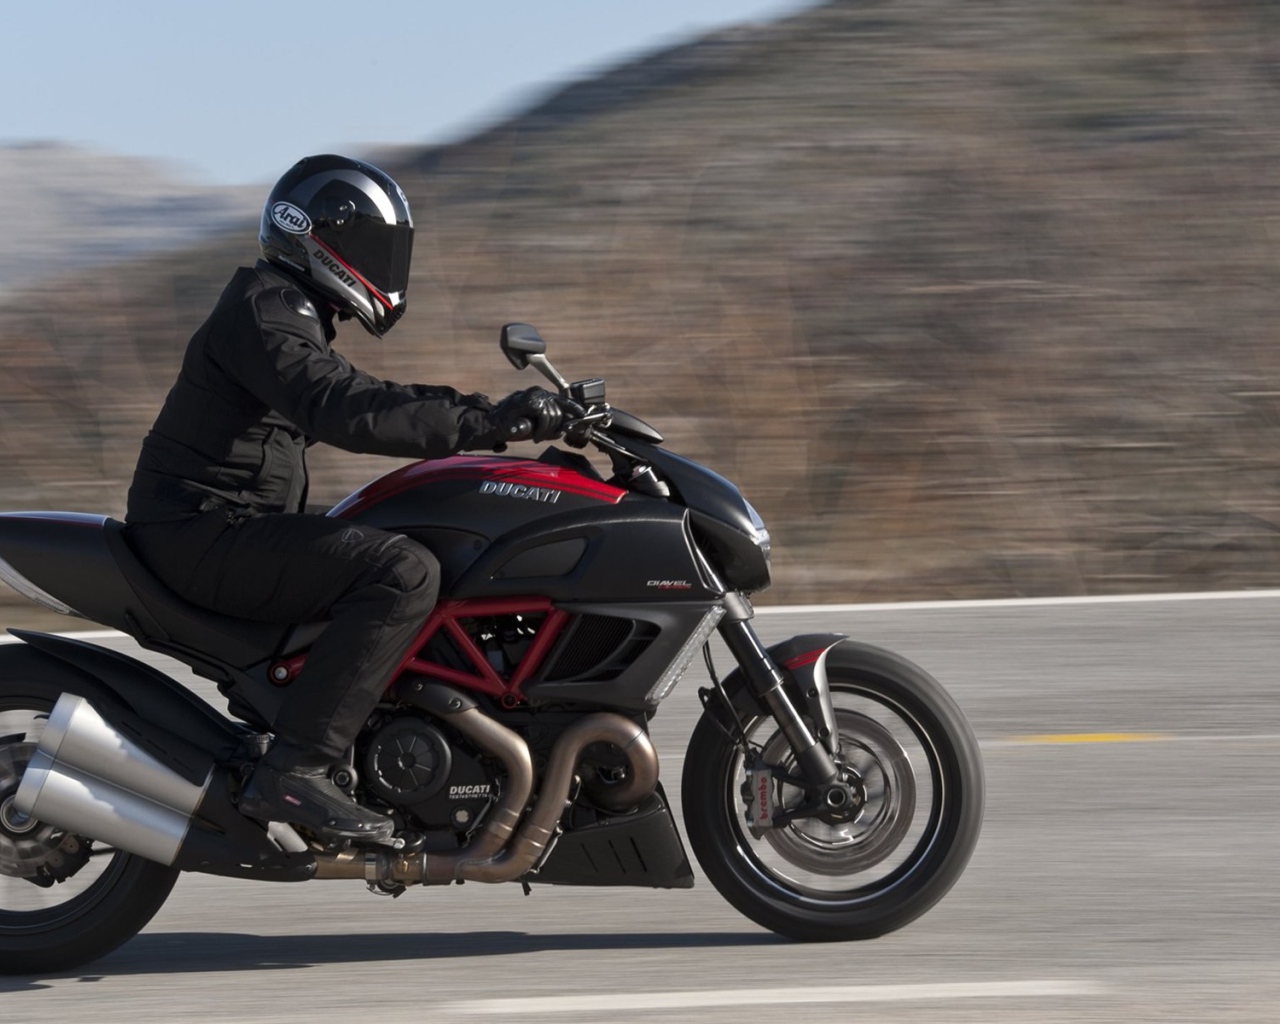 Test drive a motorcycle Ducati Diavel 